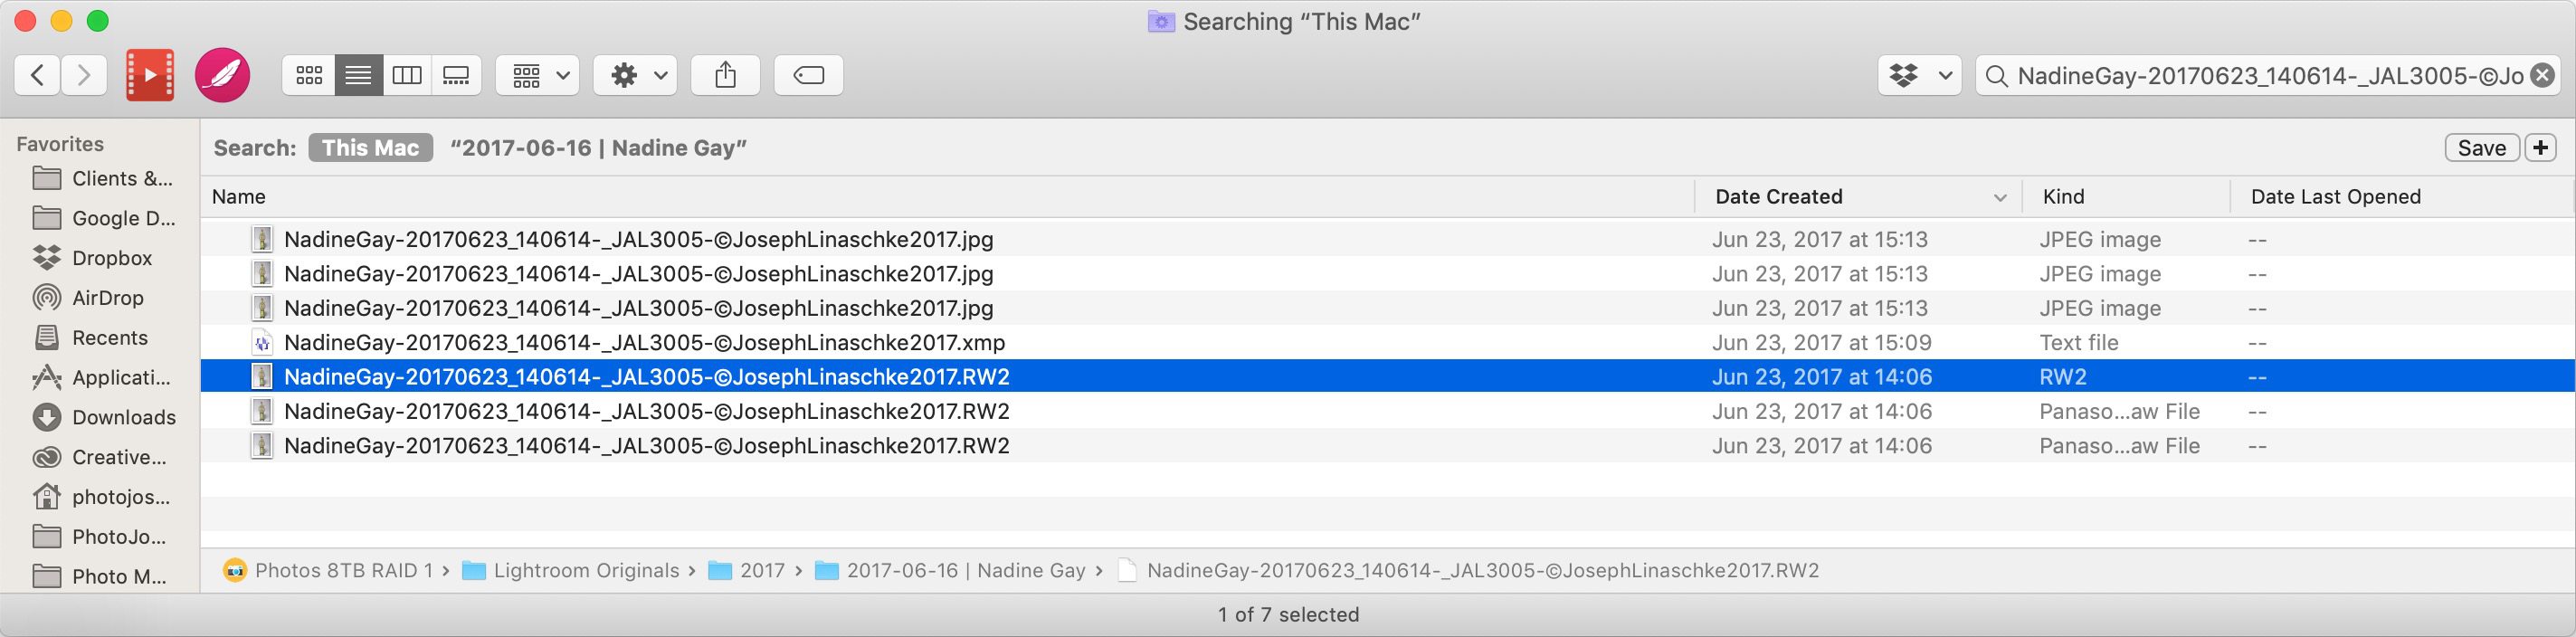 Finder showing search results